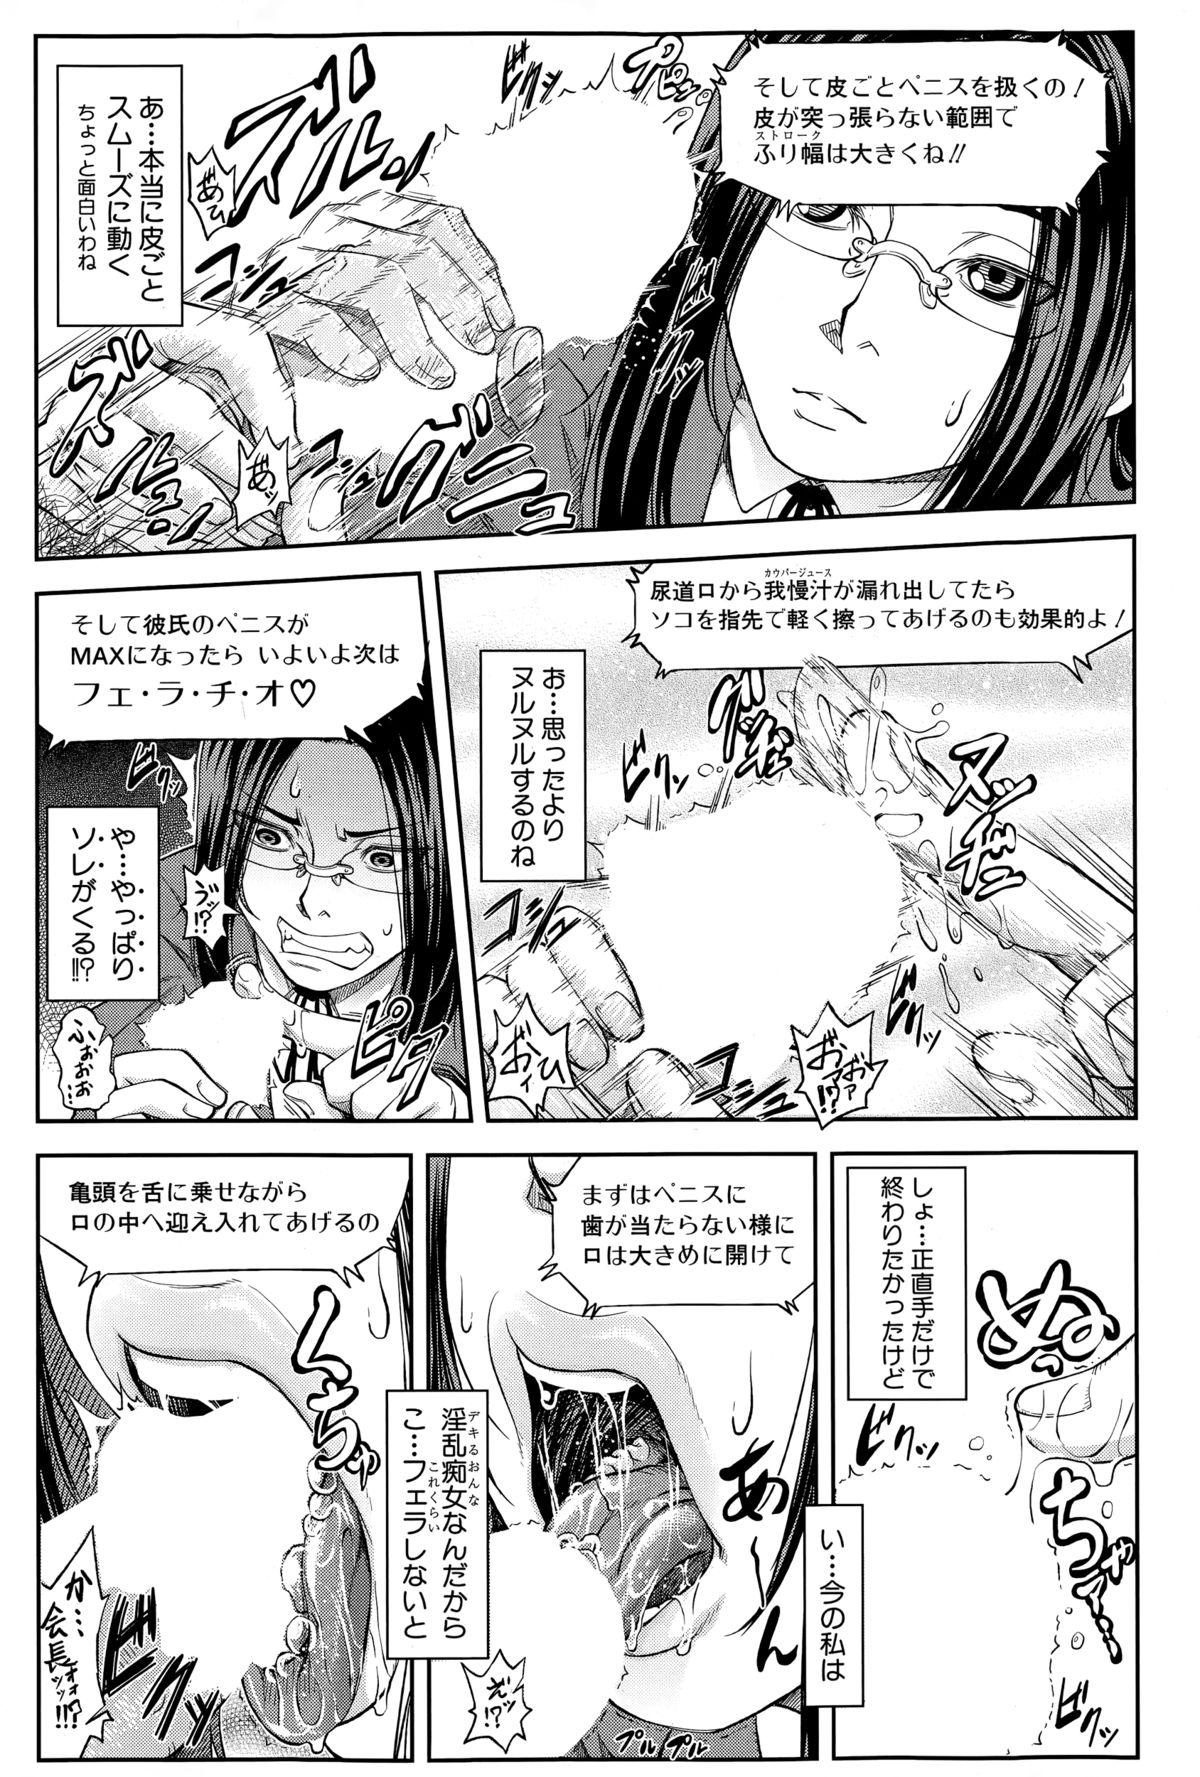 BUSTER COMIC 2015-03 204